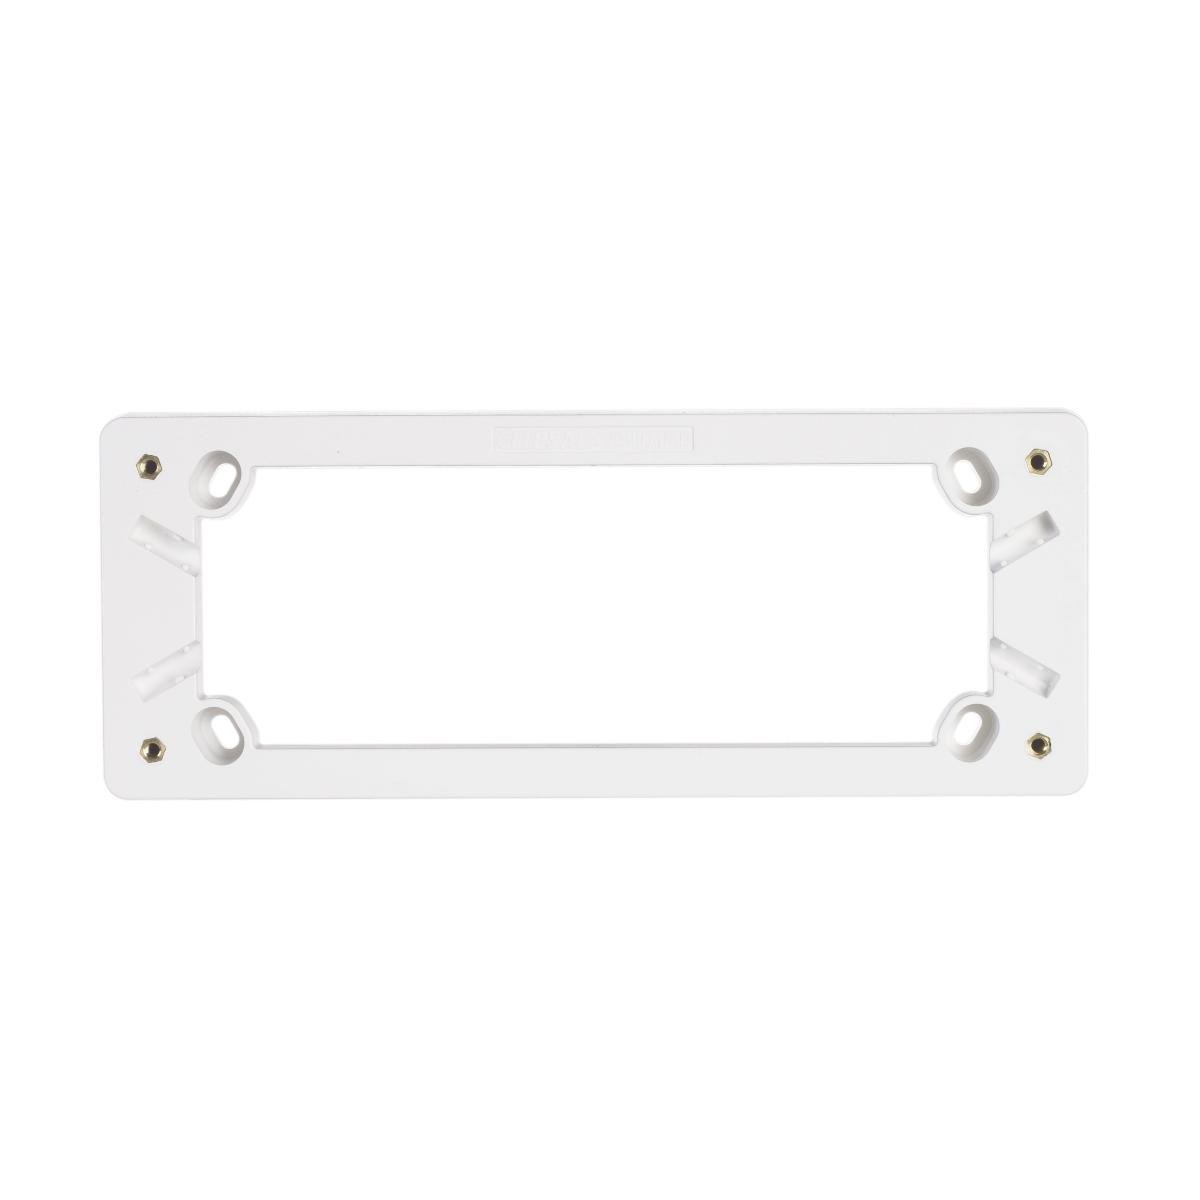 MOUNTING BLOCK FOR 4G OUTLET WHITE